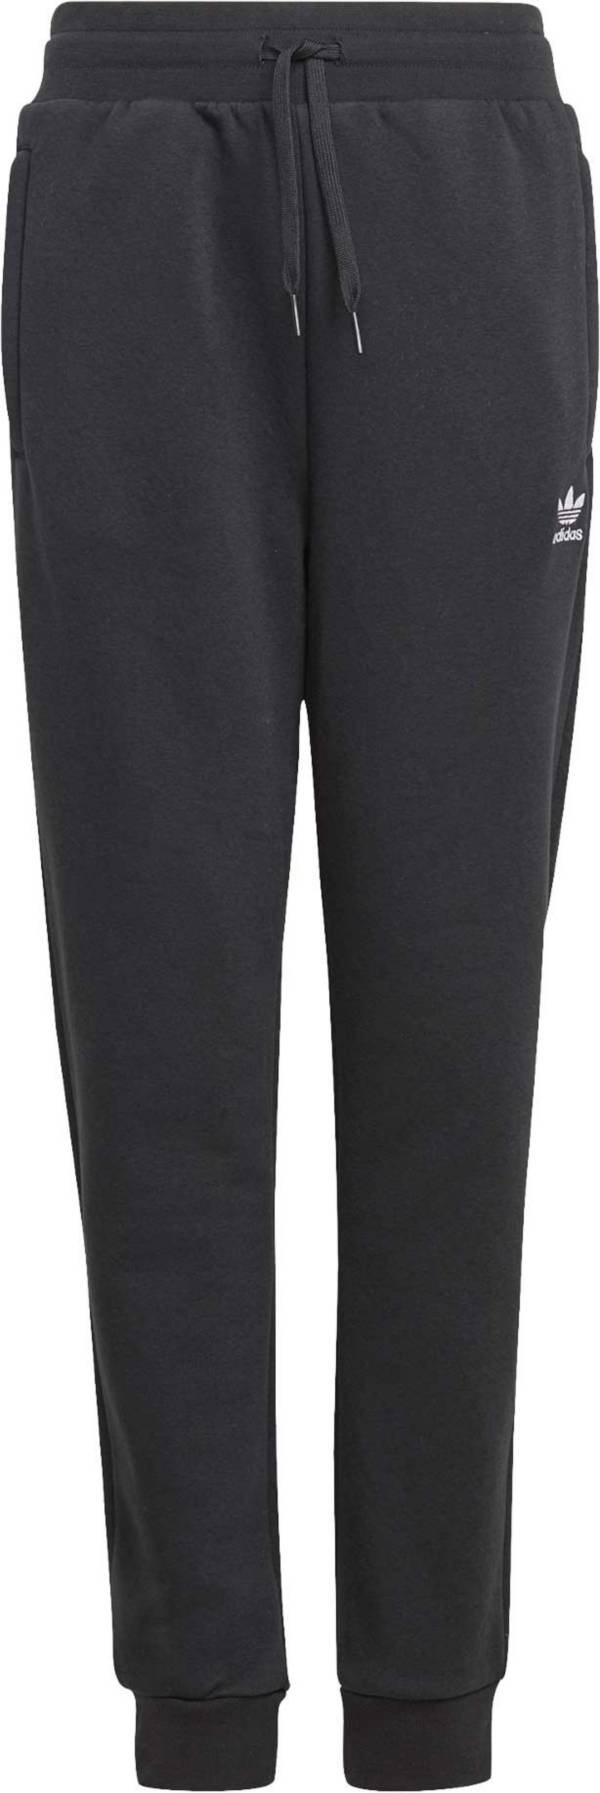 adidas Youth Essential Adicolor Pants | Dick's Sporting Goods